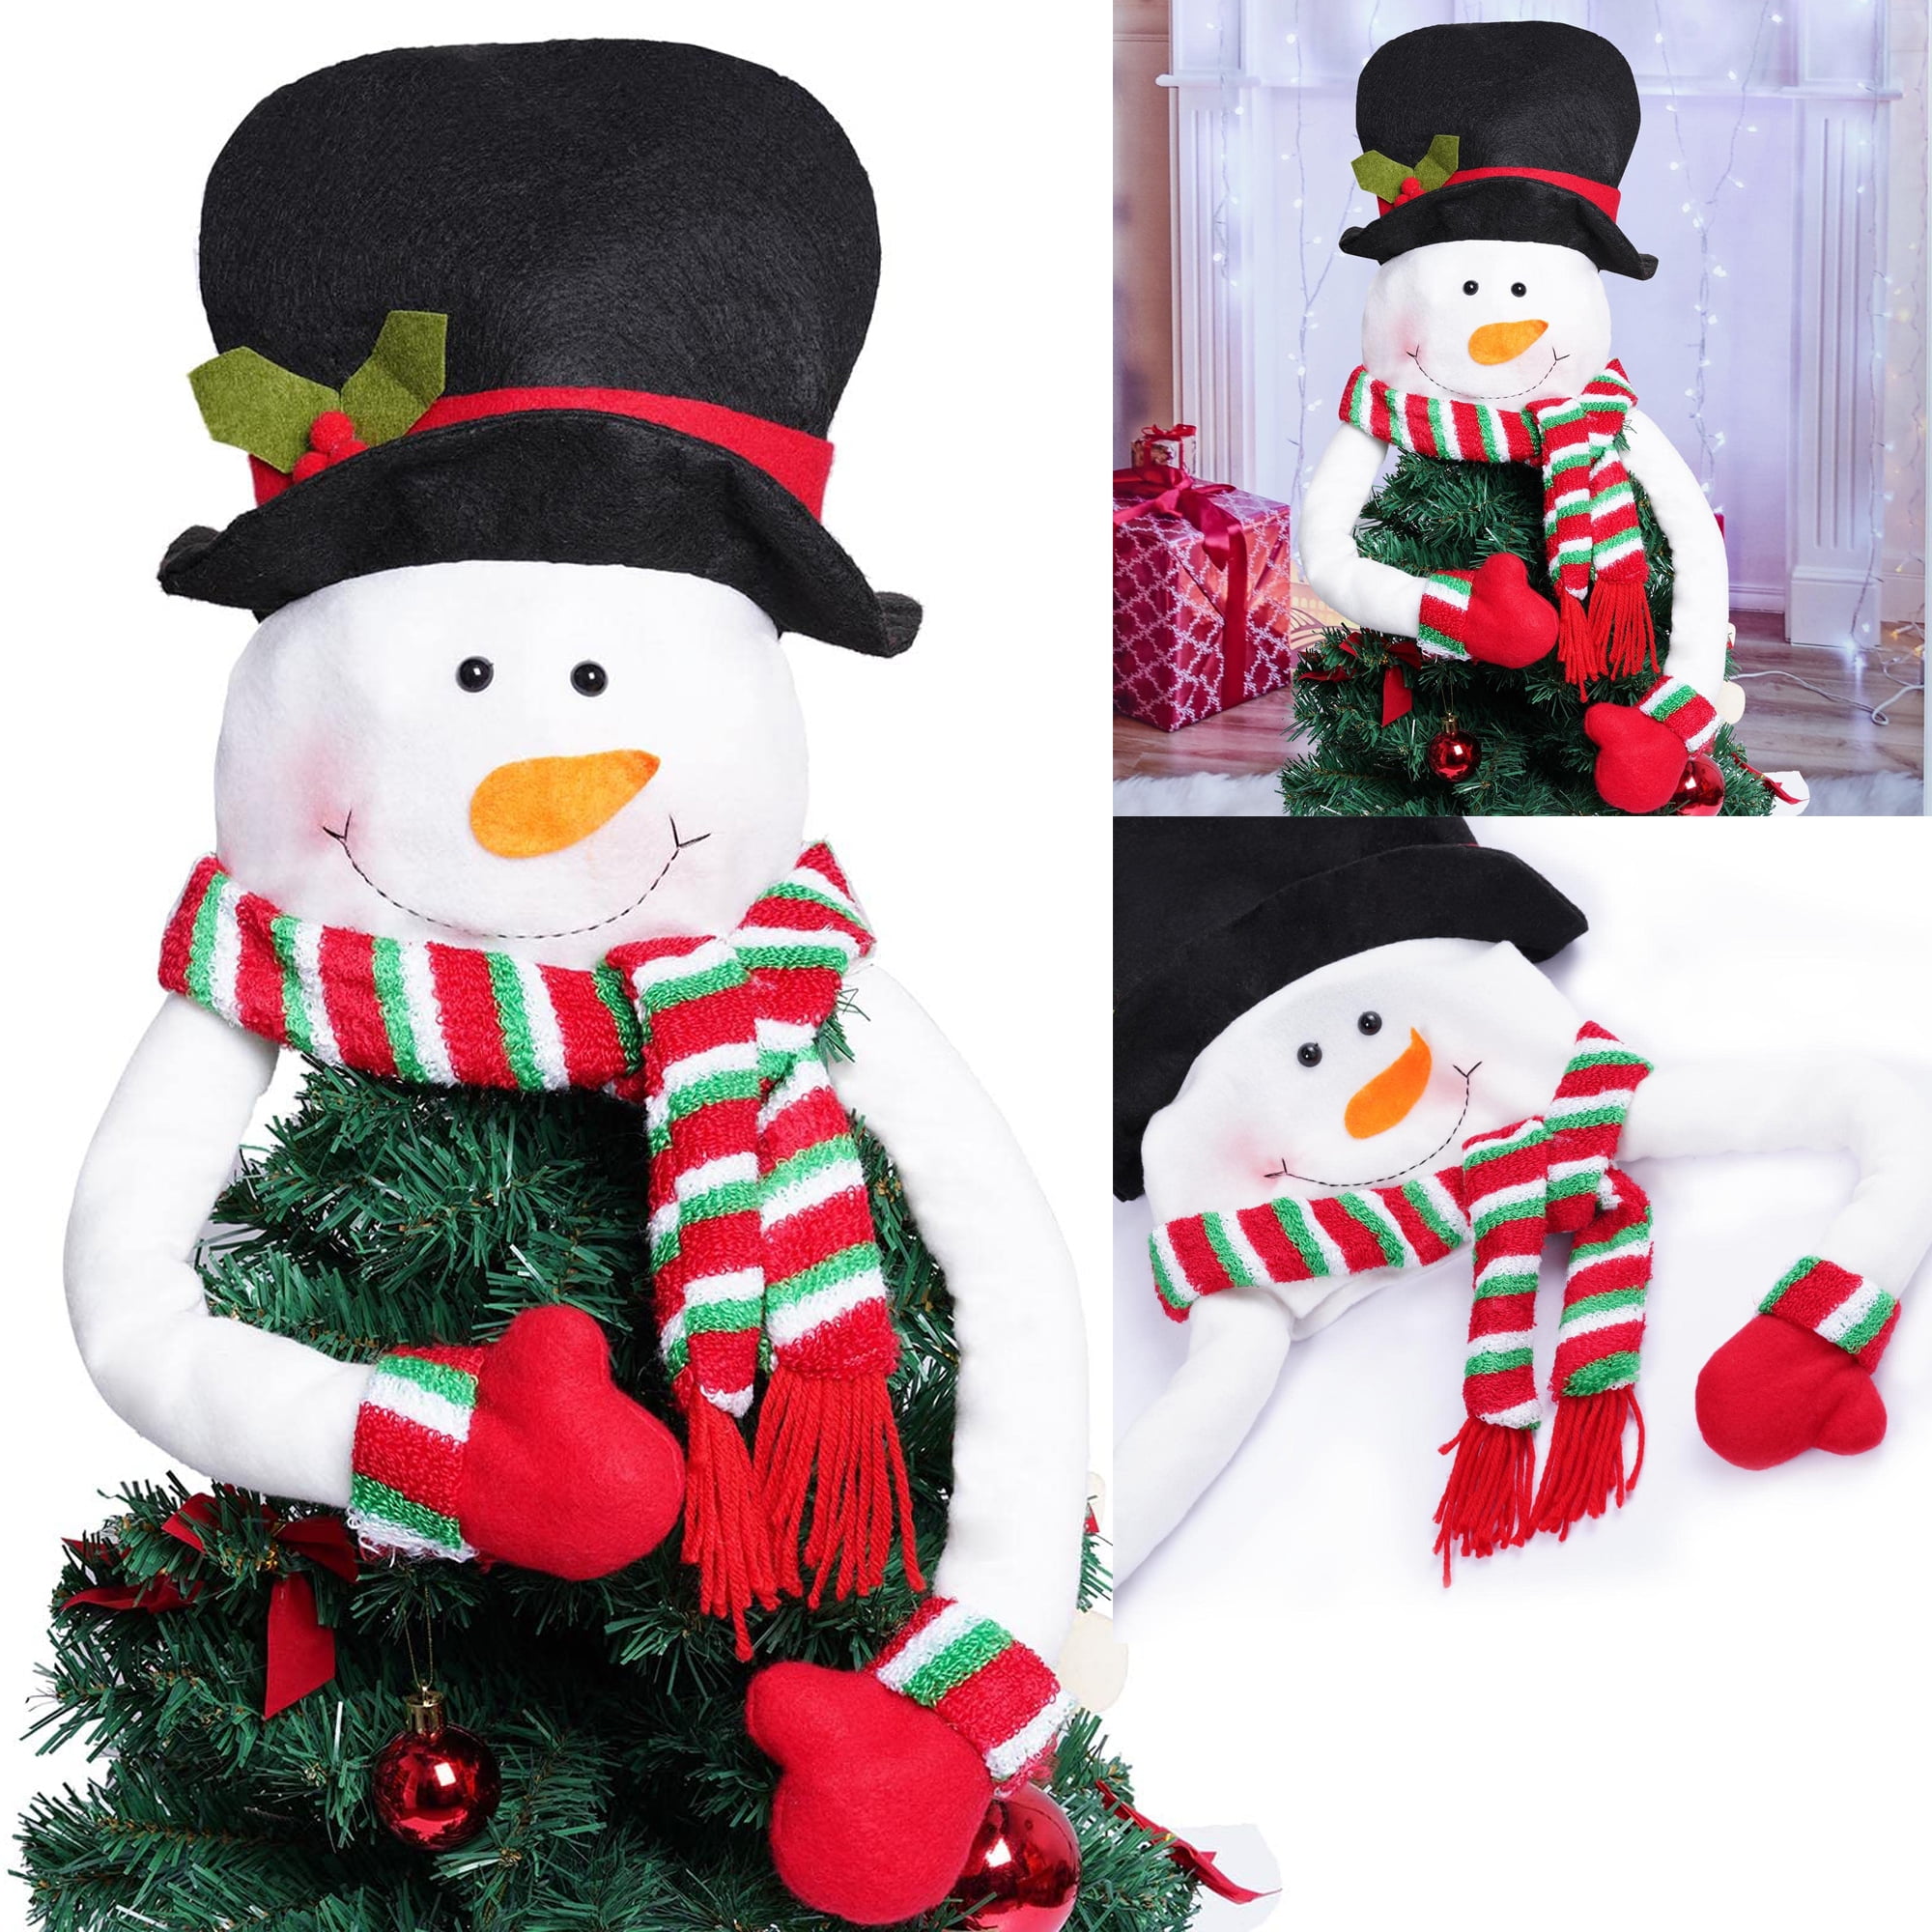 The Holiday Aisle® Styrofoam Tree Topper - Lighted & Reviews